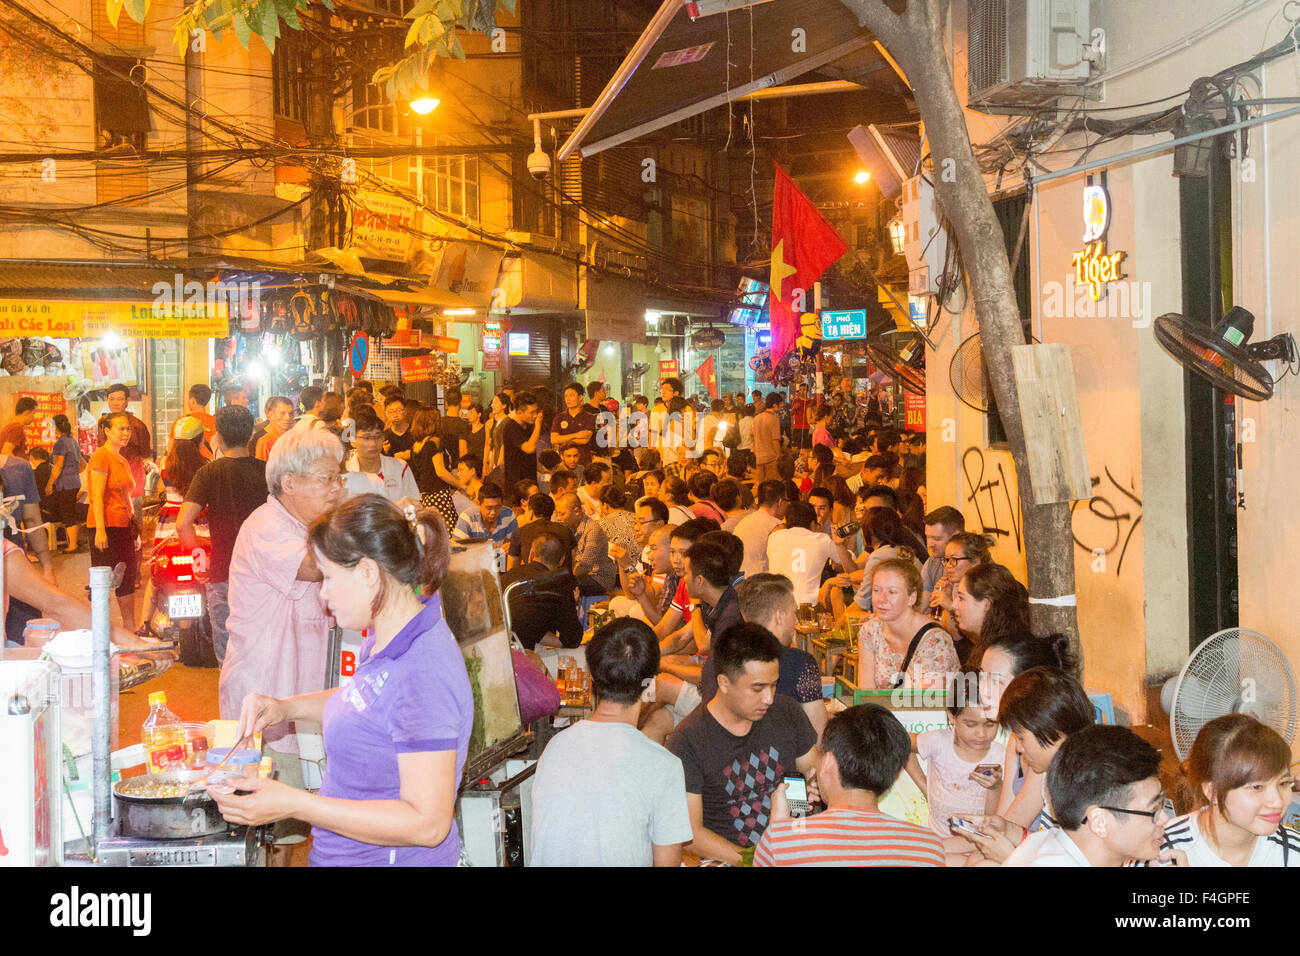 evening, Hanoi old quarter is packed in the evening with people enjoying street food and drinks at the many bars,Hanoi,Vietnam Stock Photo